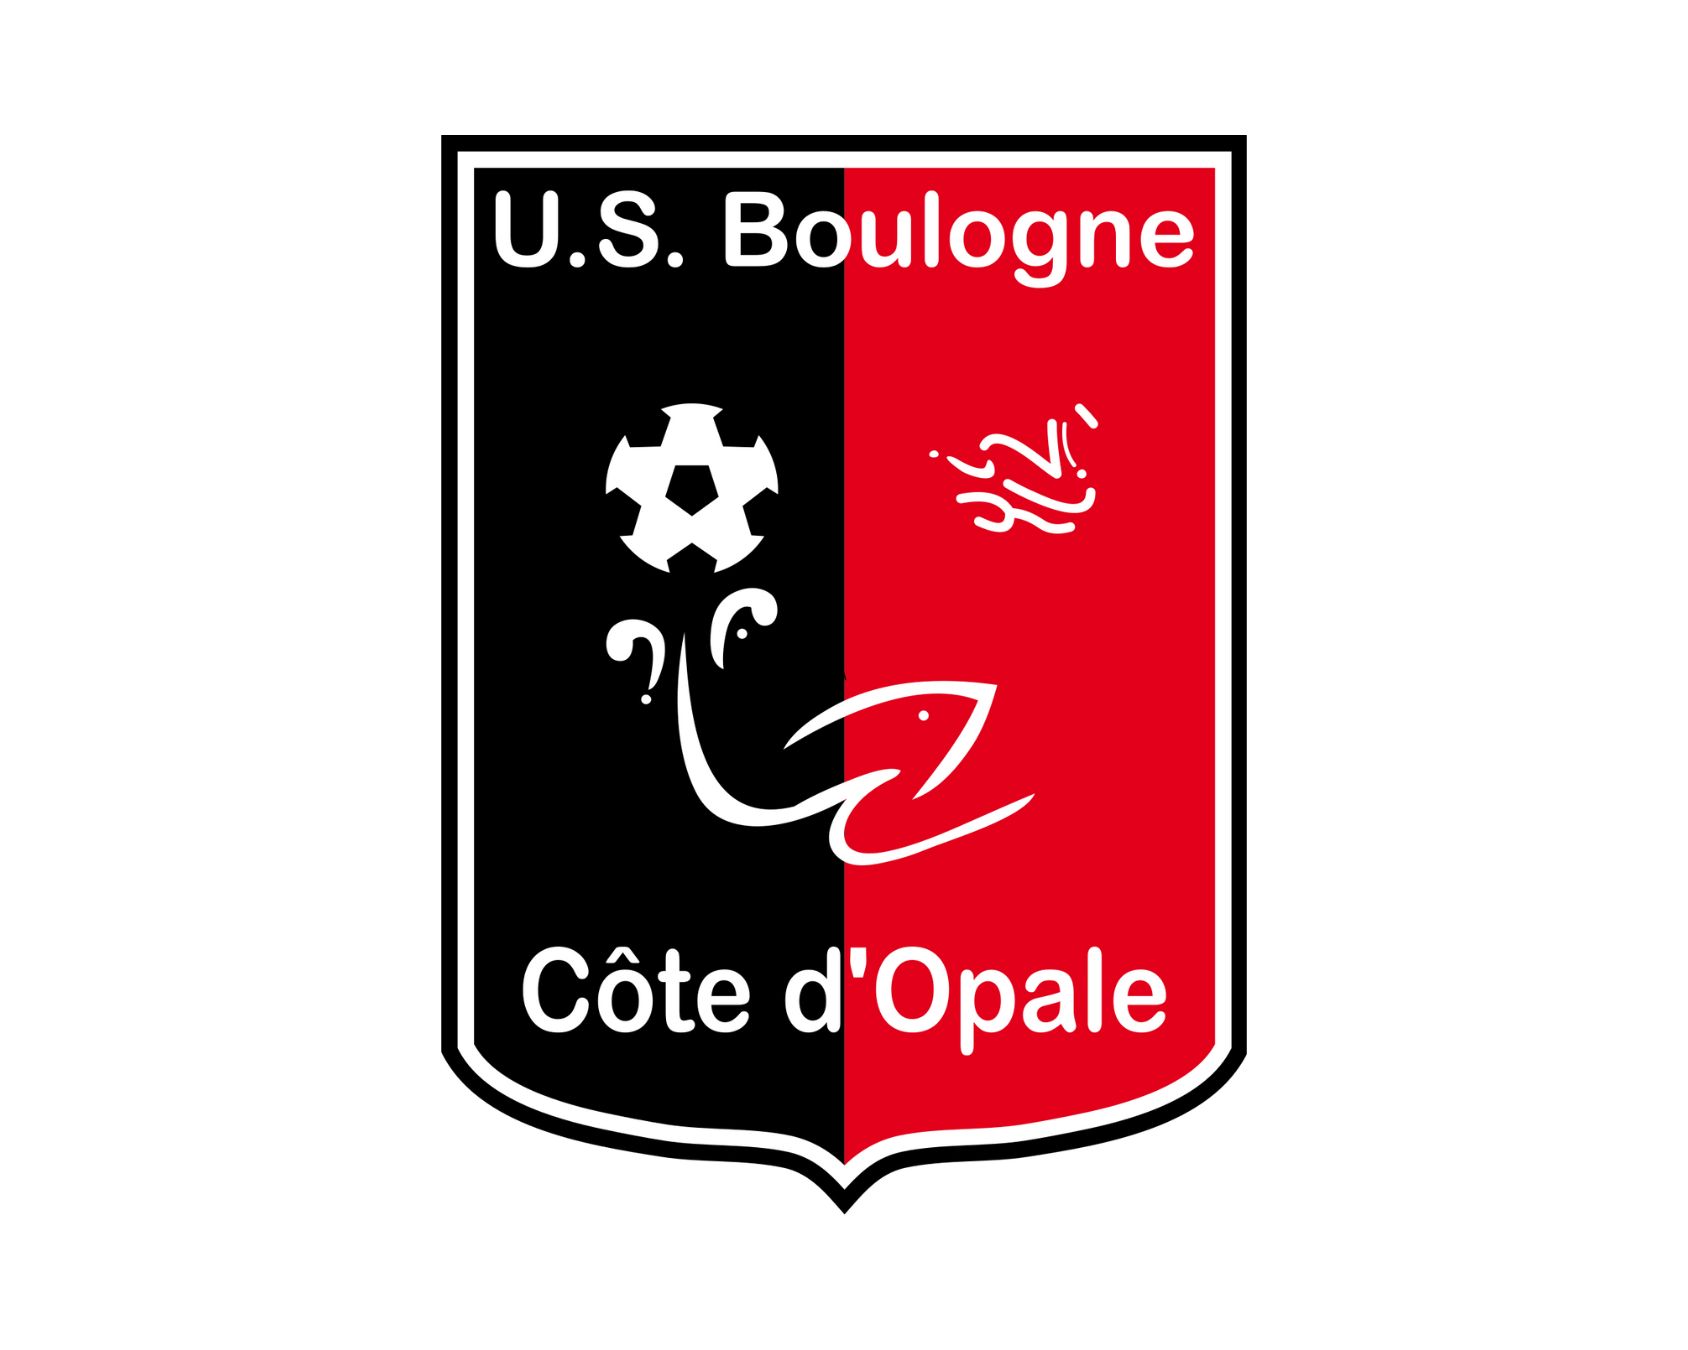 Us Boulogne: 21 Football Club Facts - Facts.net